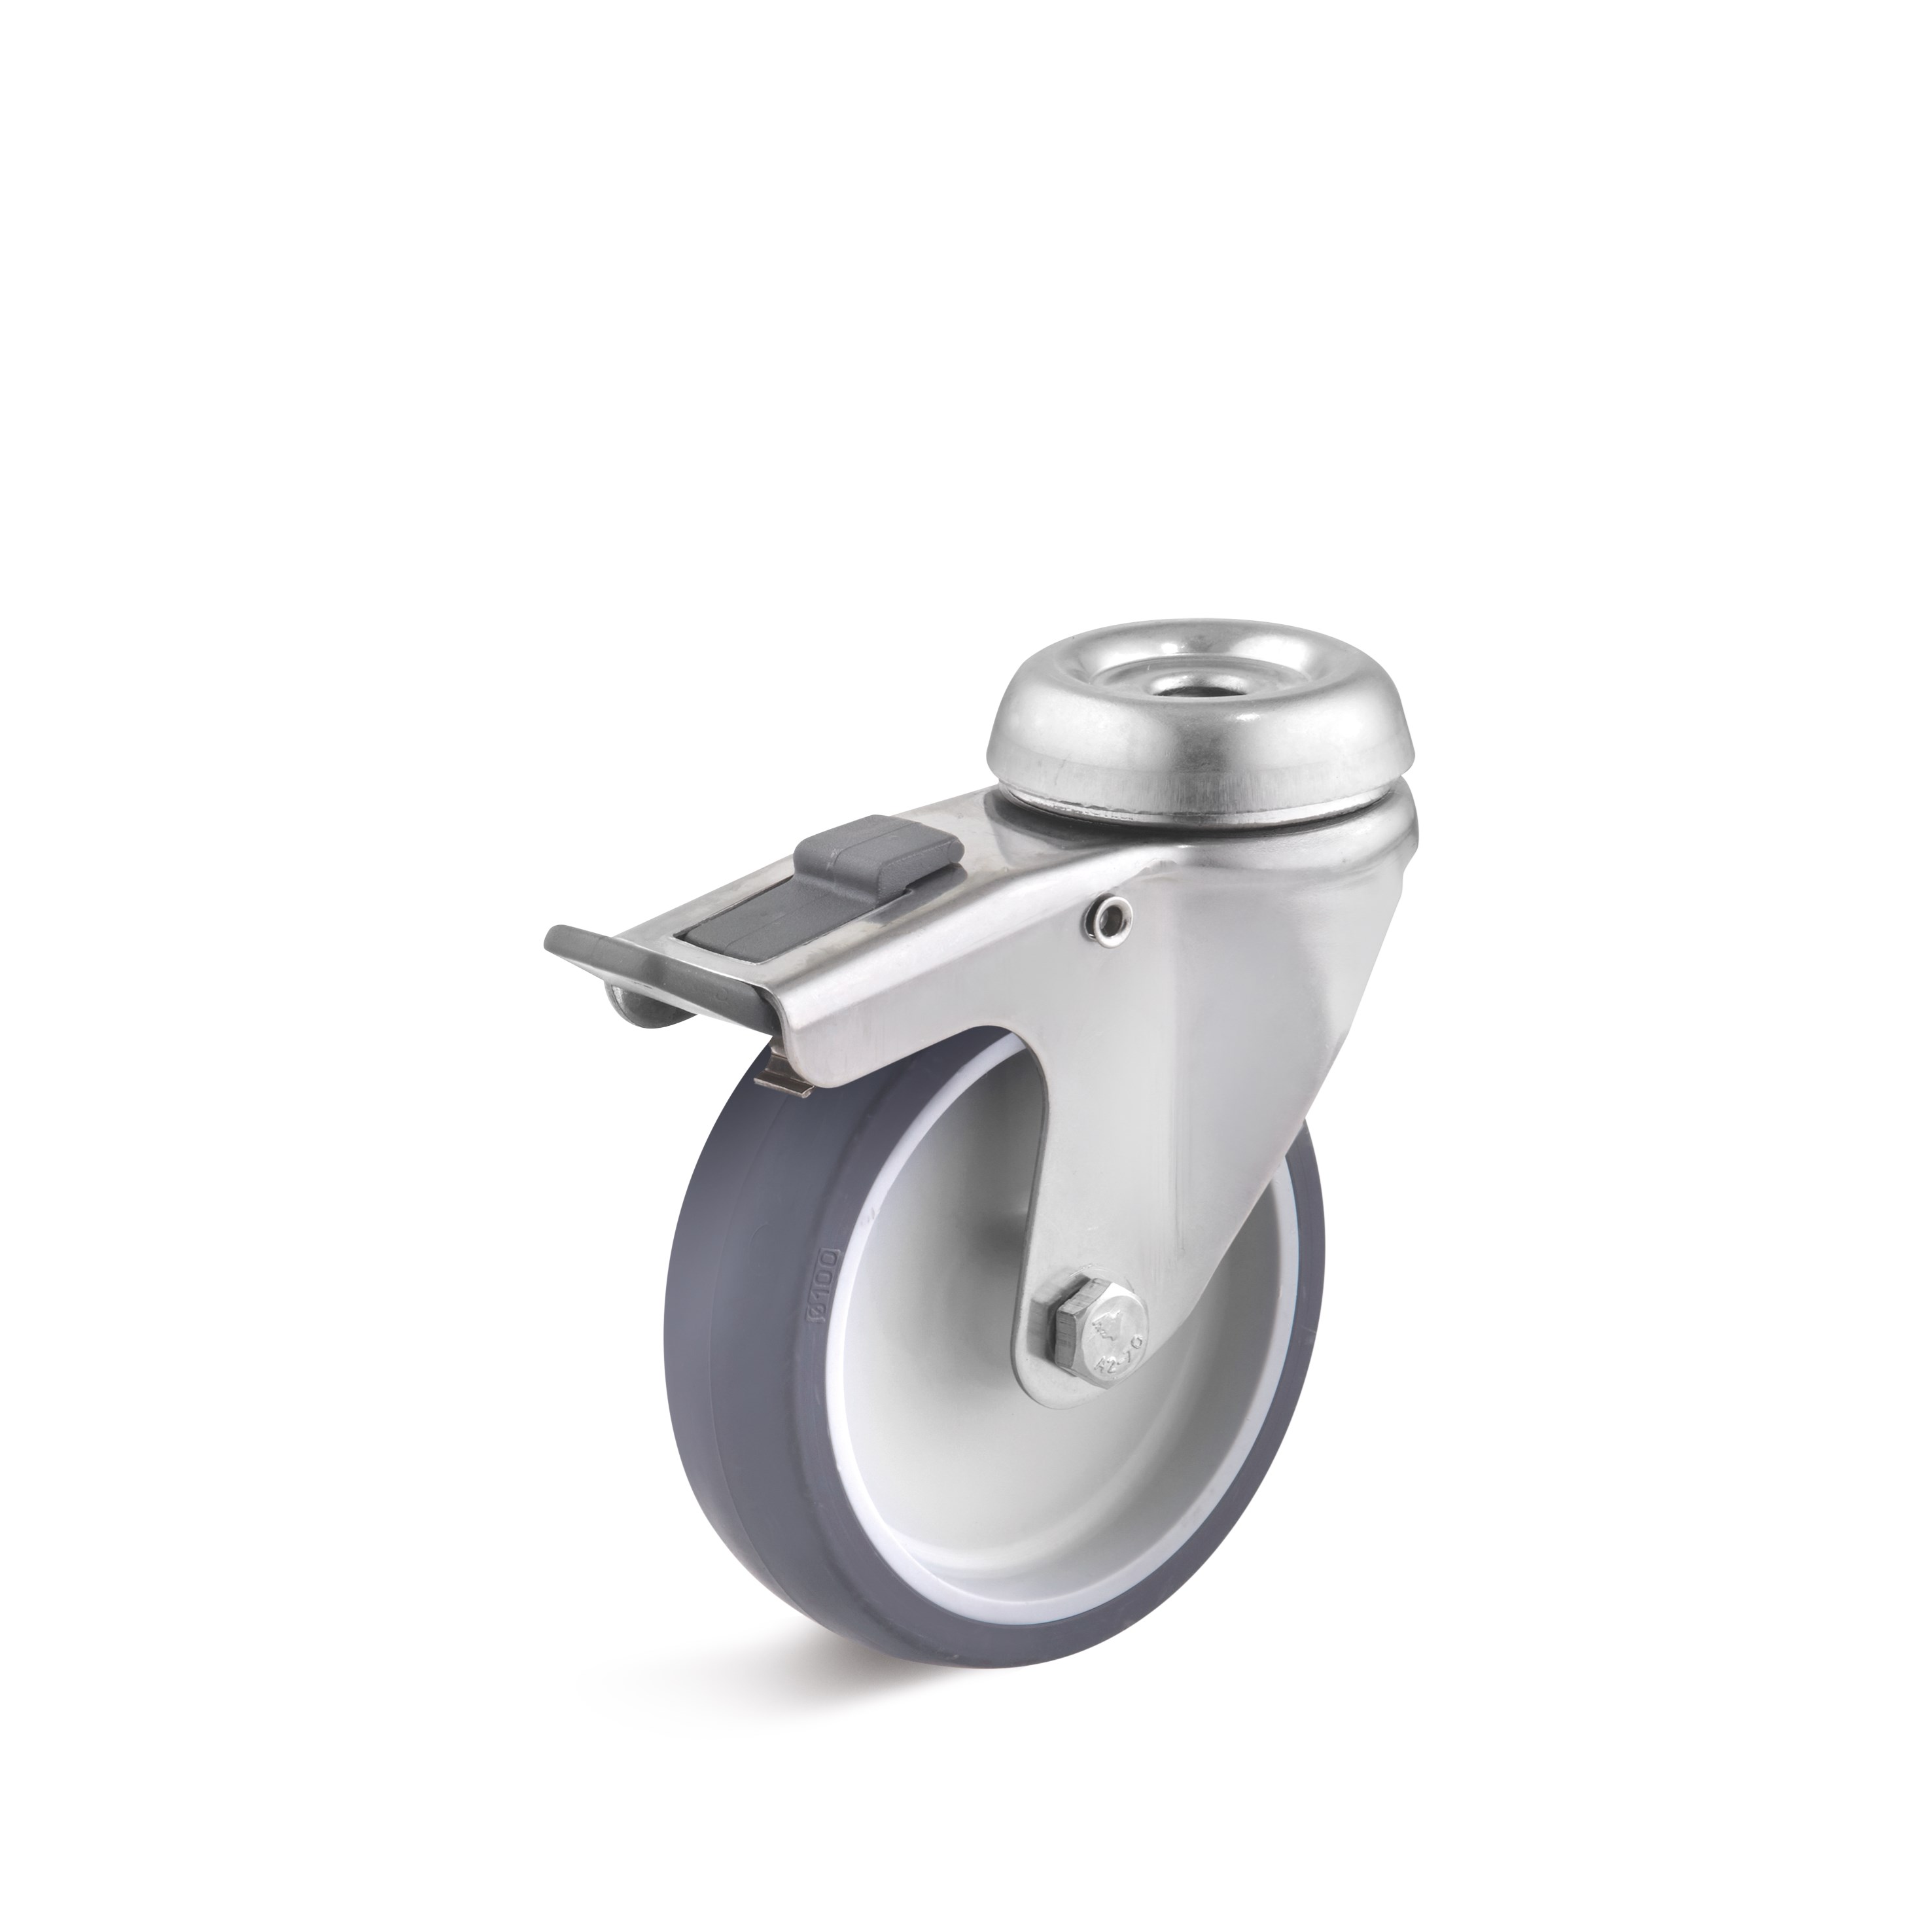 Stainless steel swivel castor with double stop and bolt hole, thermoplastic wheel L-AV-TPGK-050-G-1-DSN